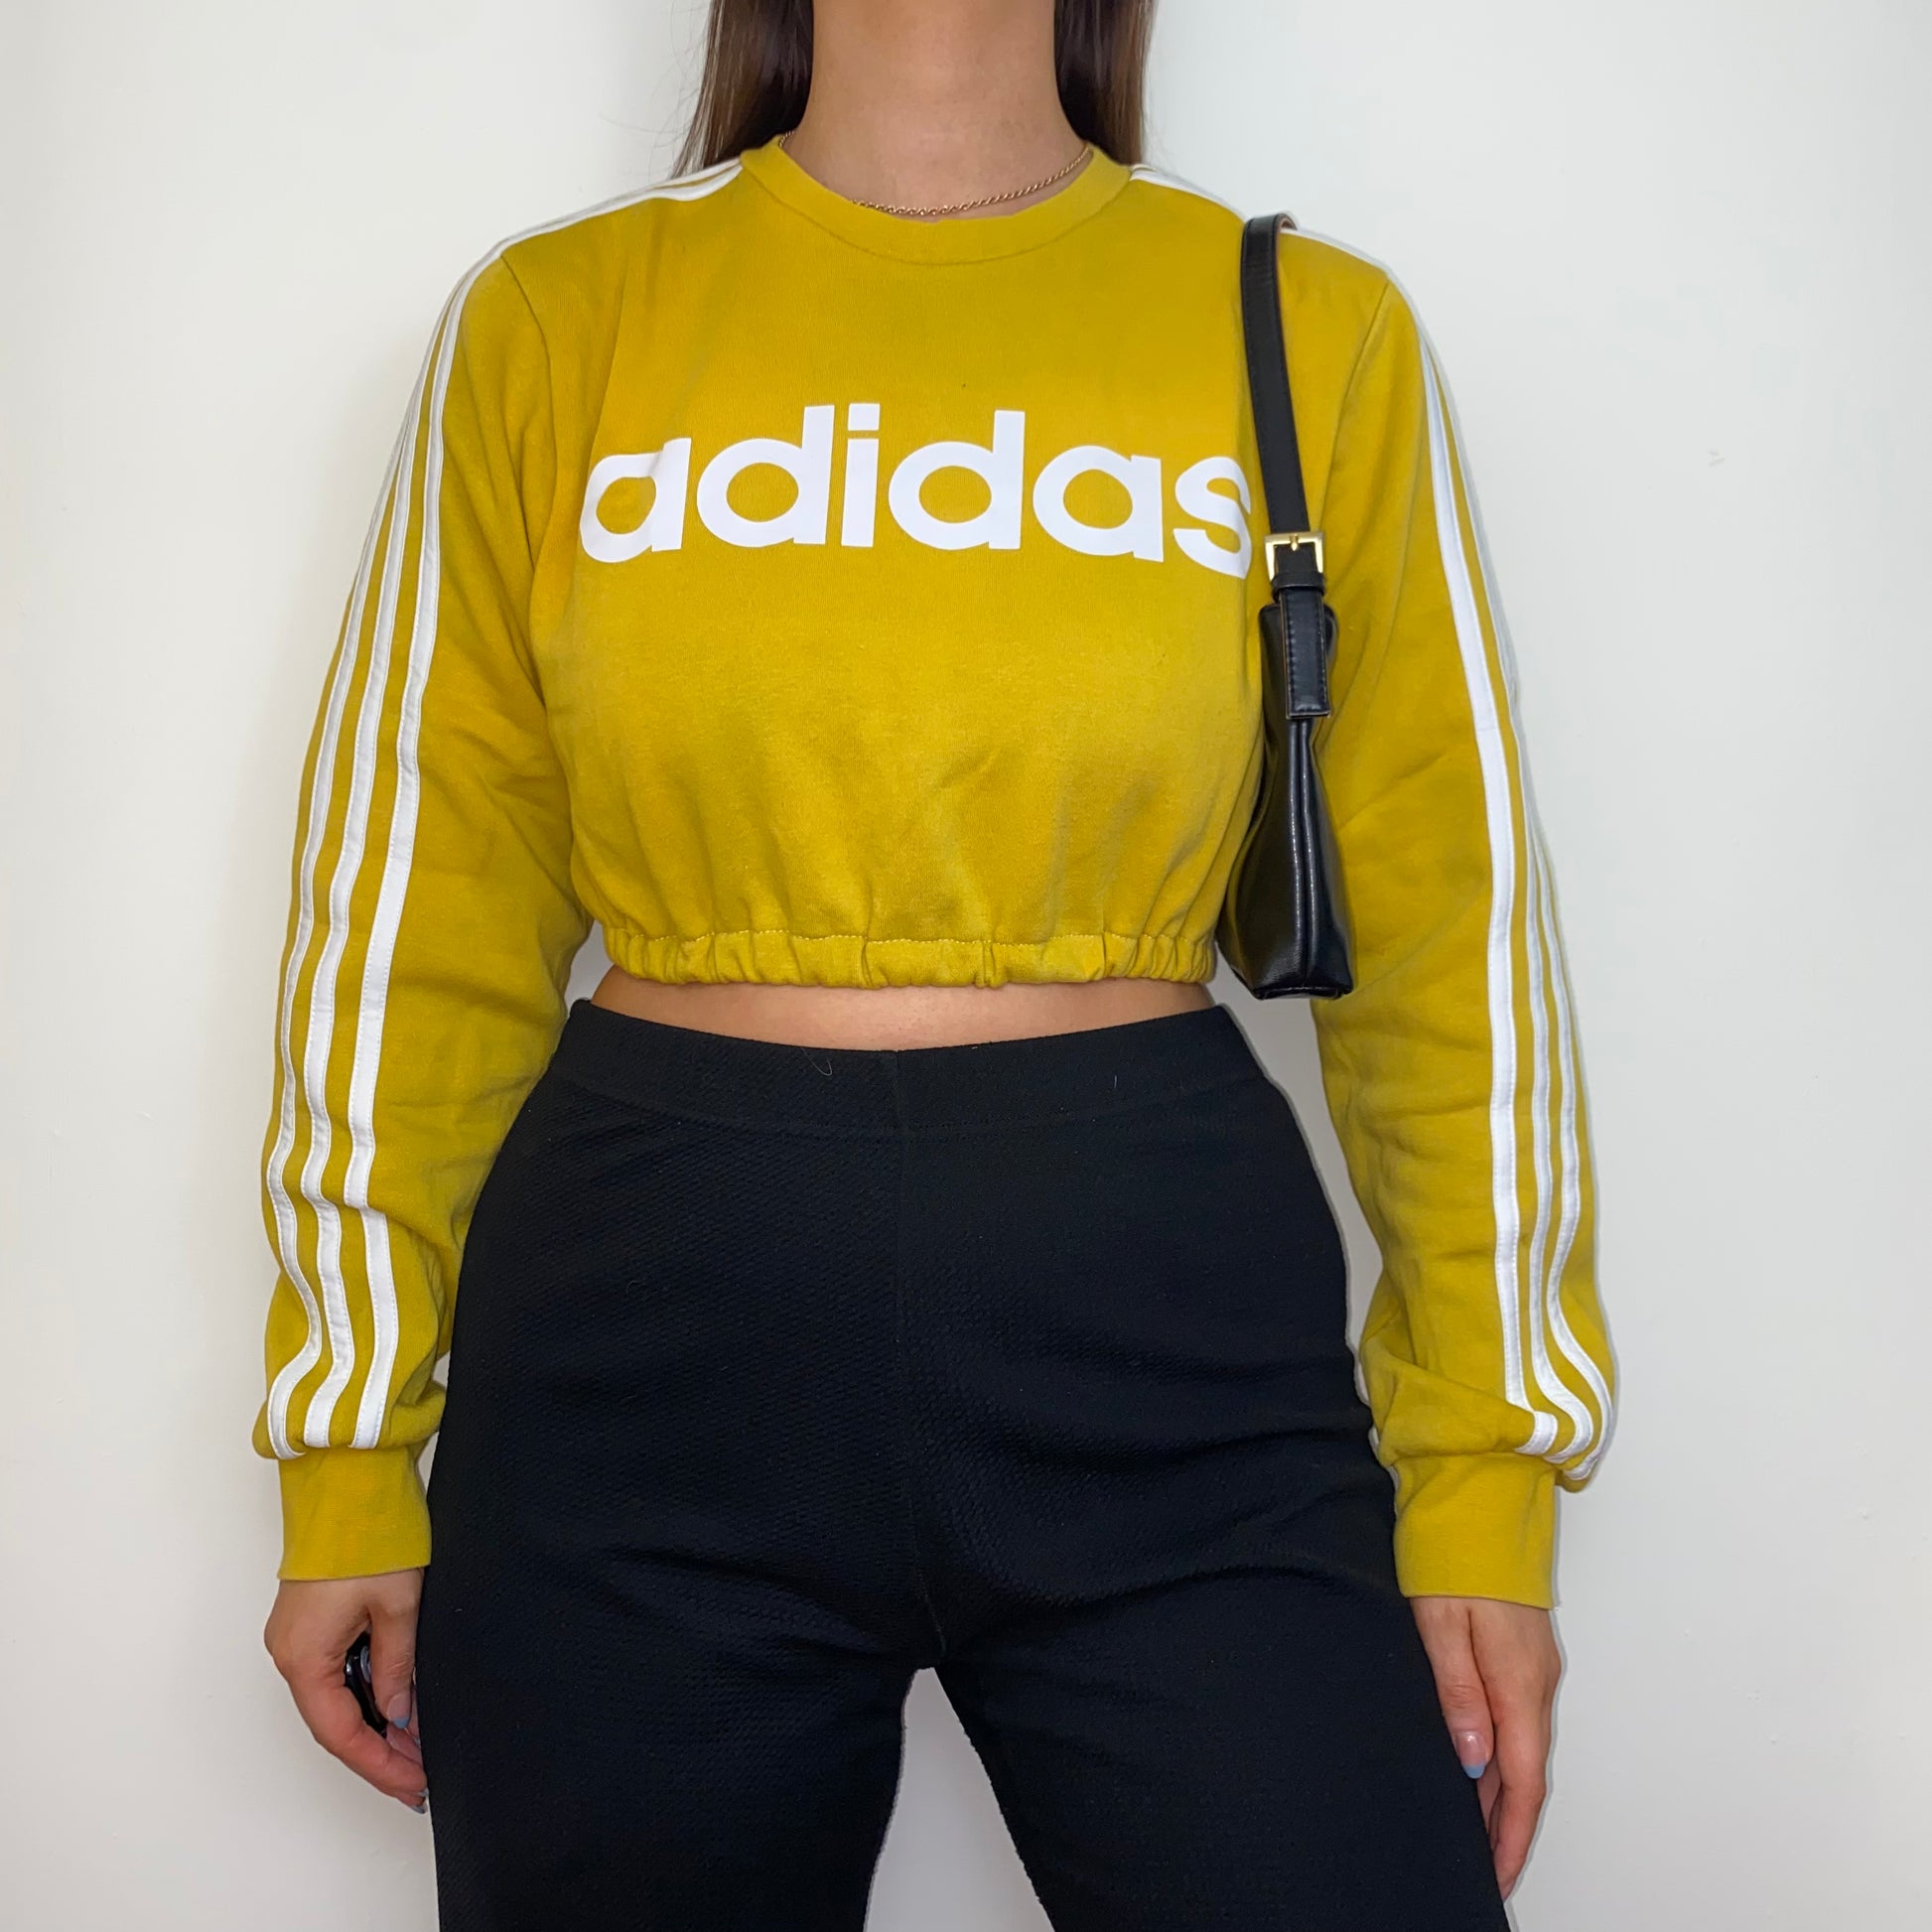 yellow cropped sweatshirt with white adidas logo shown on a model wearing black trousers and a black shoulder bag